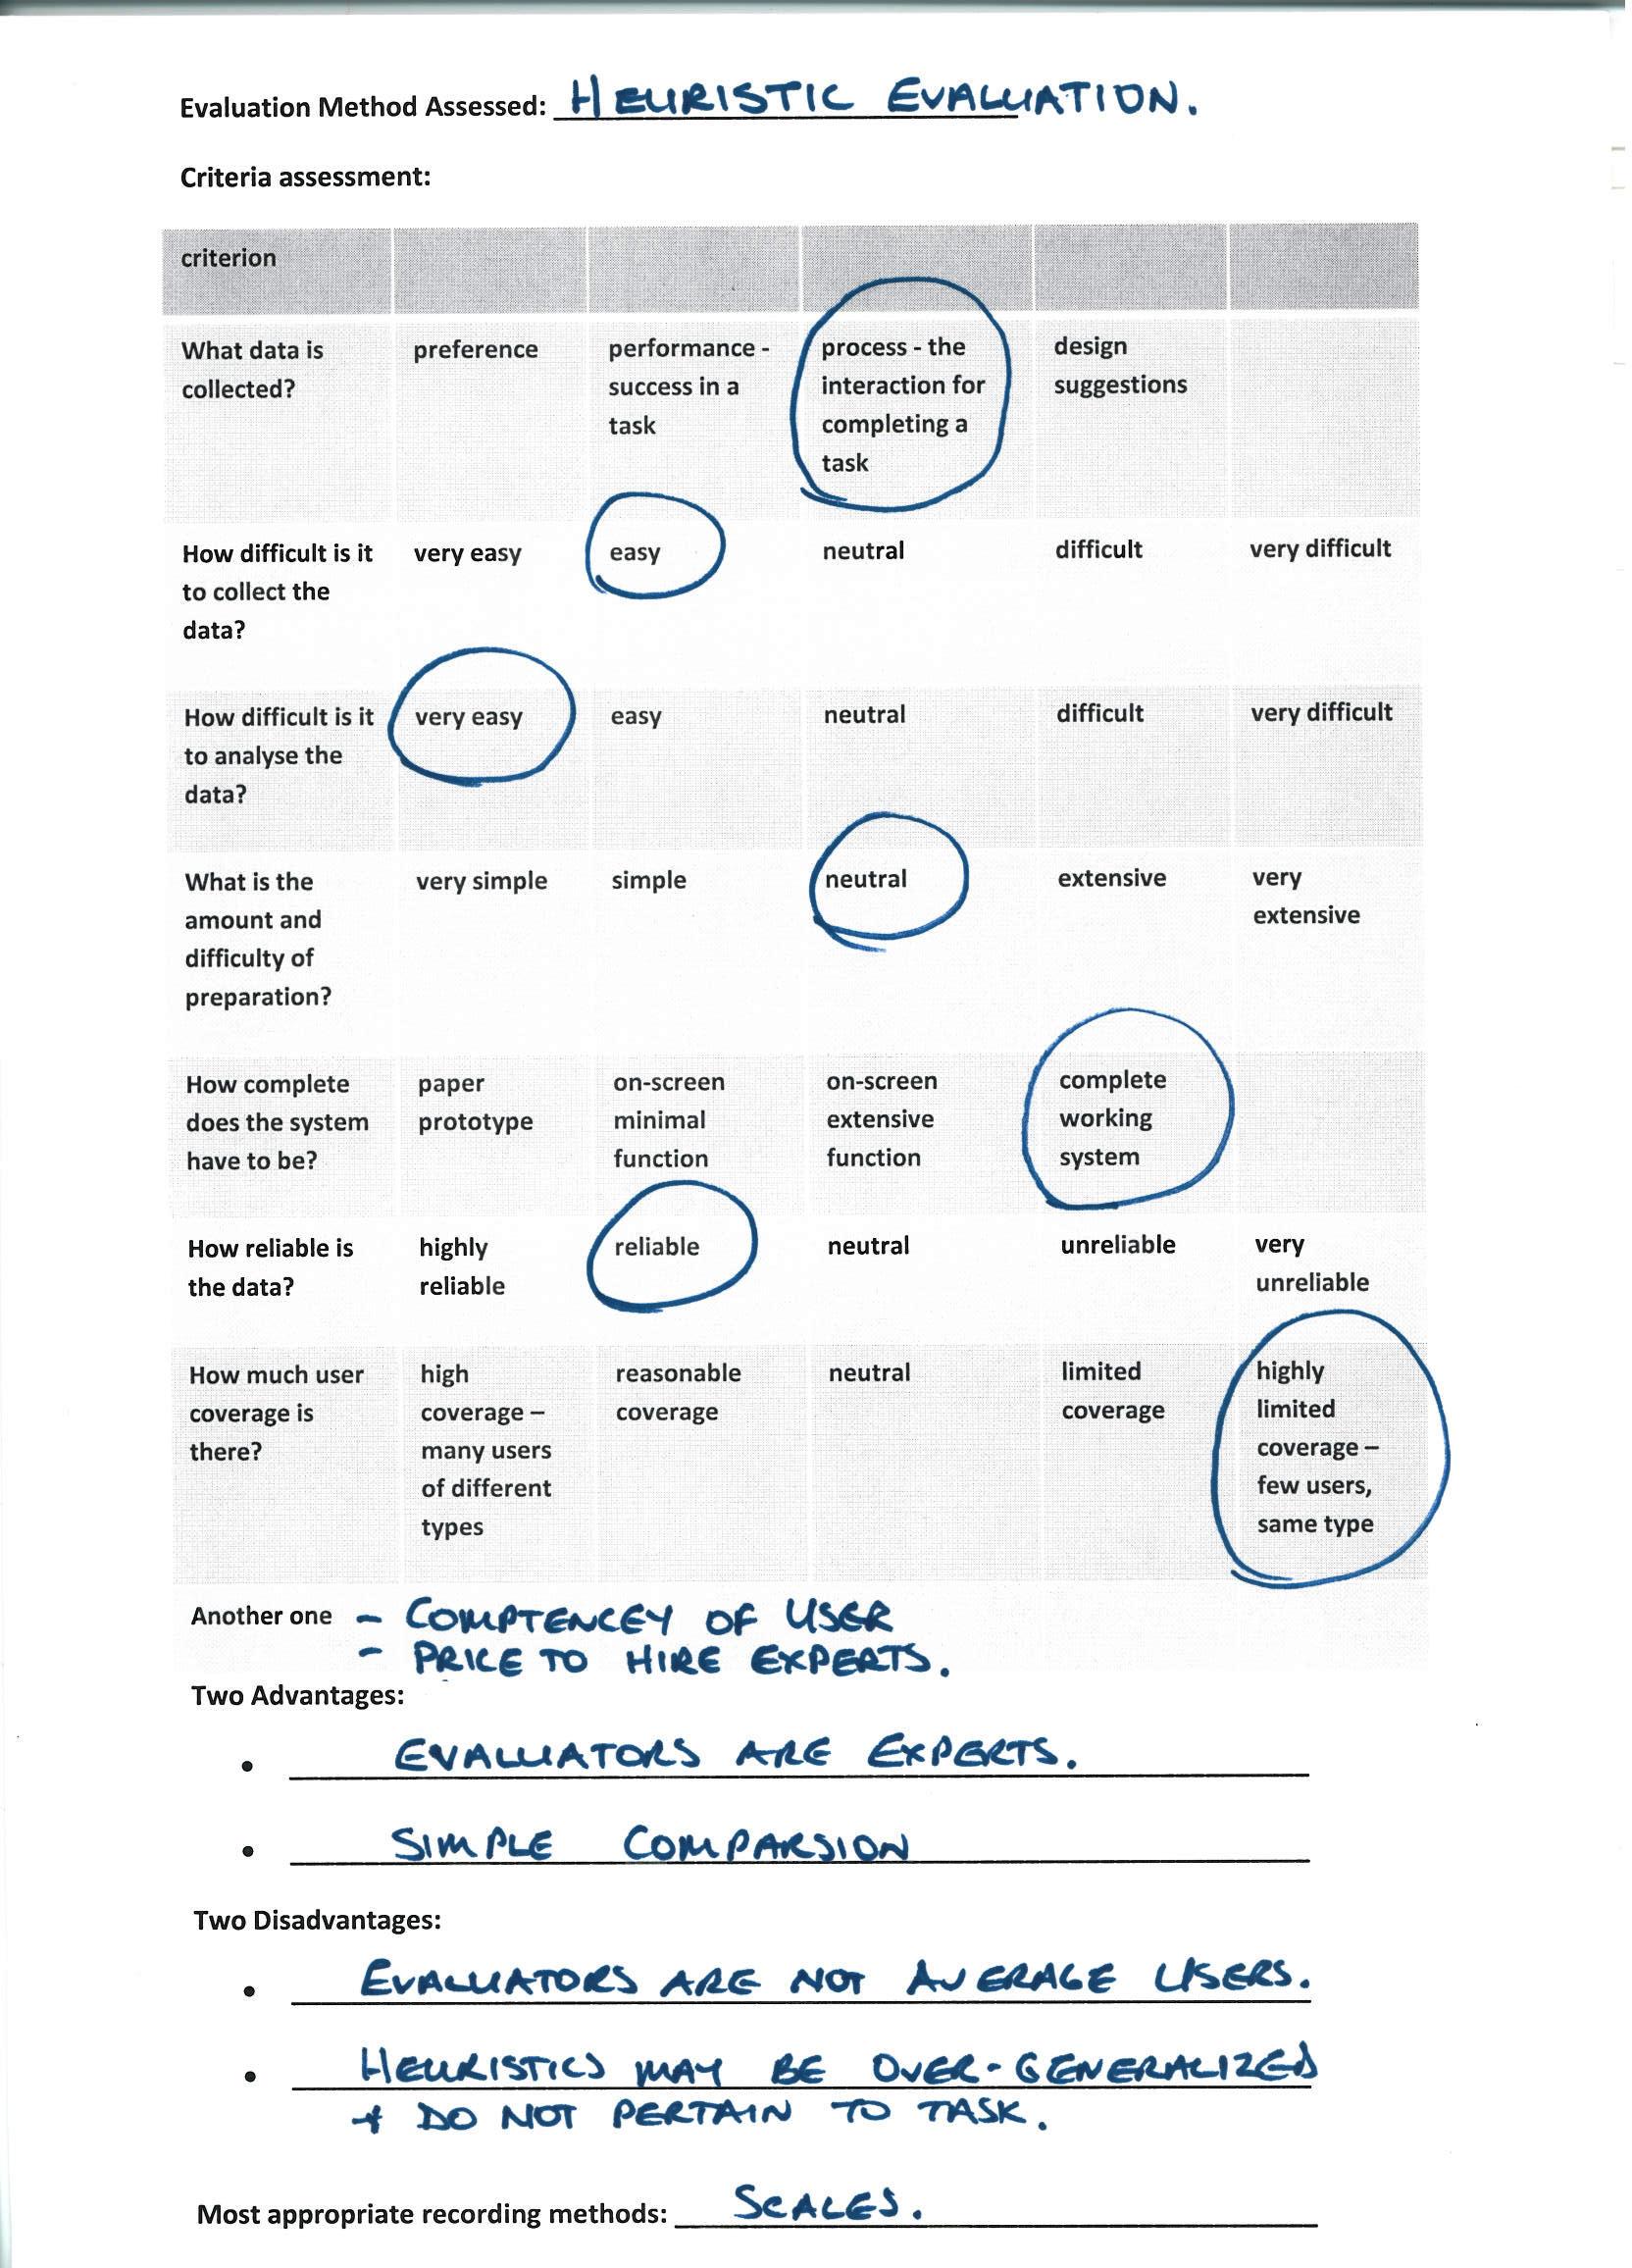 A completed form where a student has assessed focus groups according to given criteria